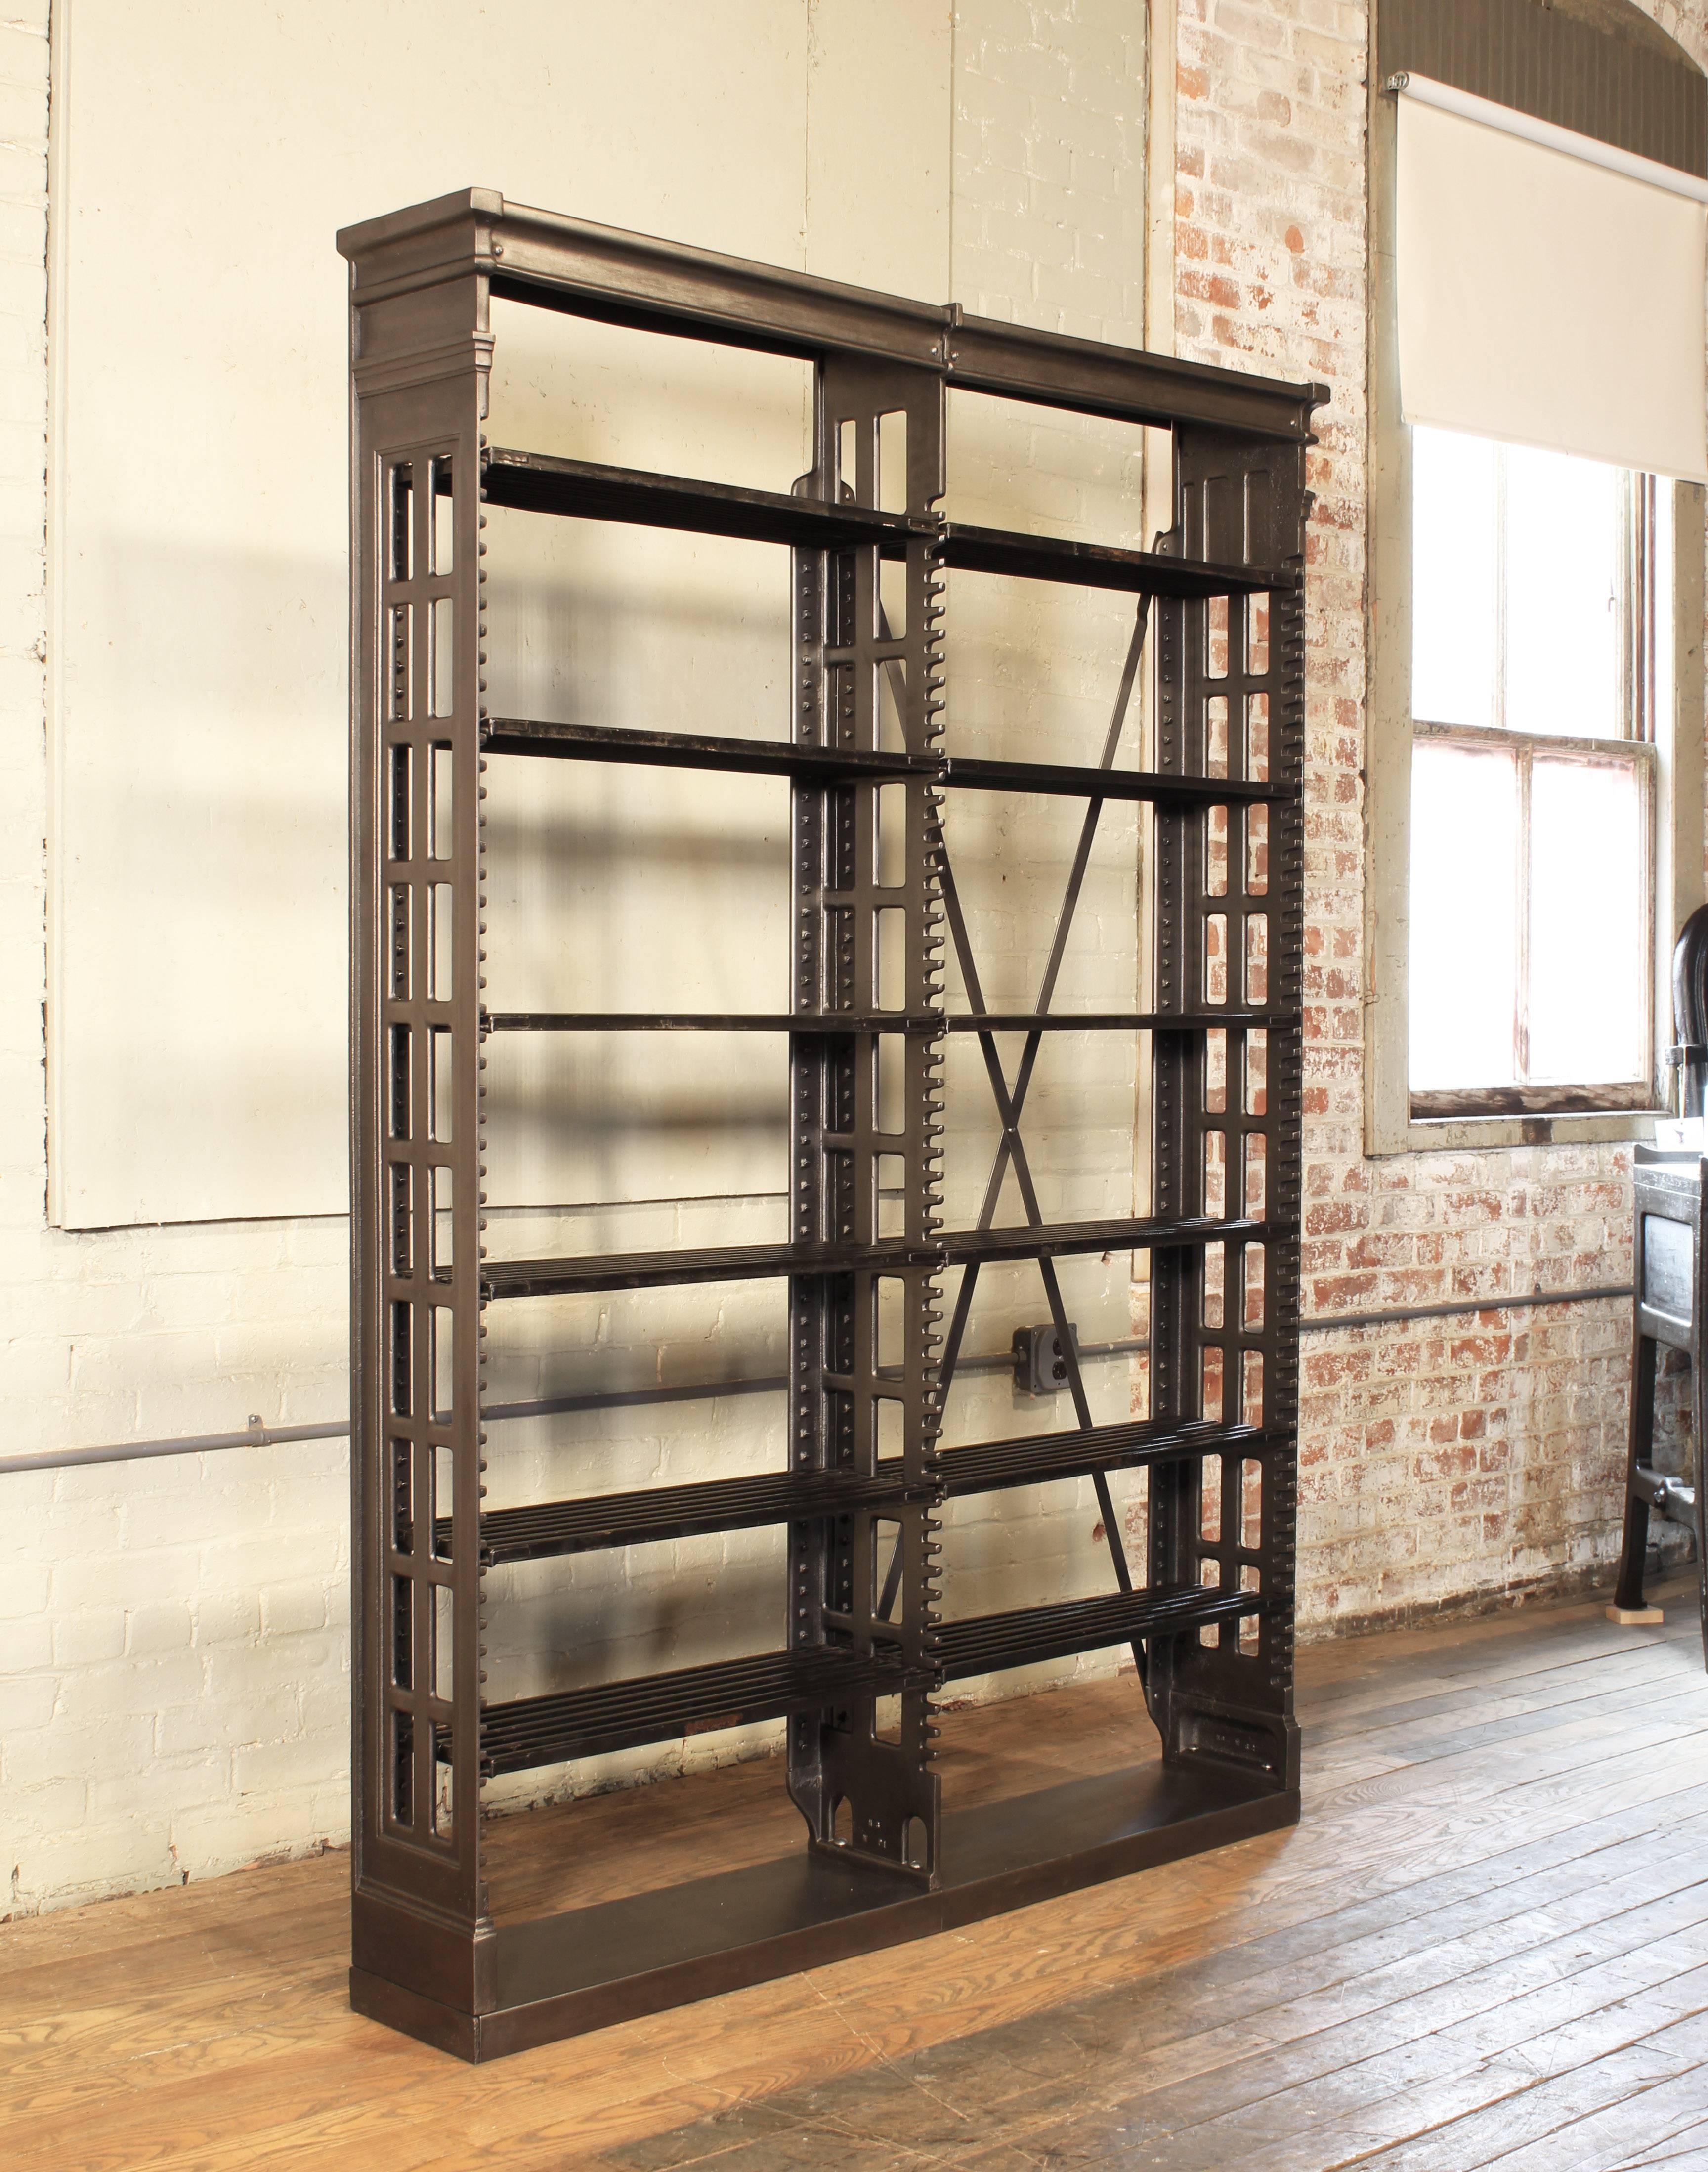 Antique cast iron and metal library bookshelf, bookcase, storage shelving. Rare end model. Overall dimensions measure 56 9/16